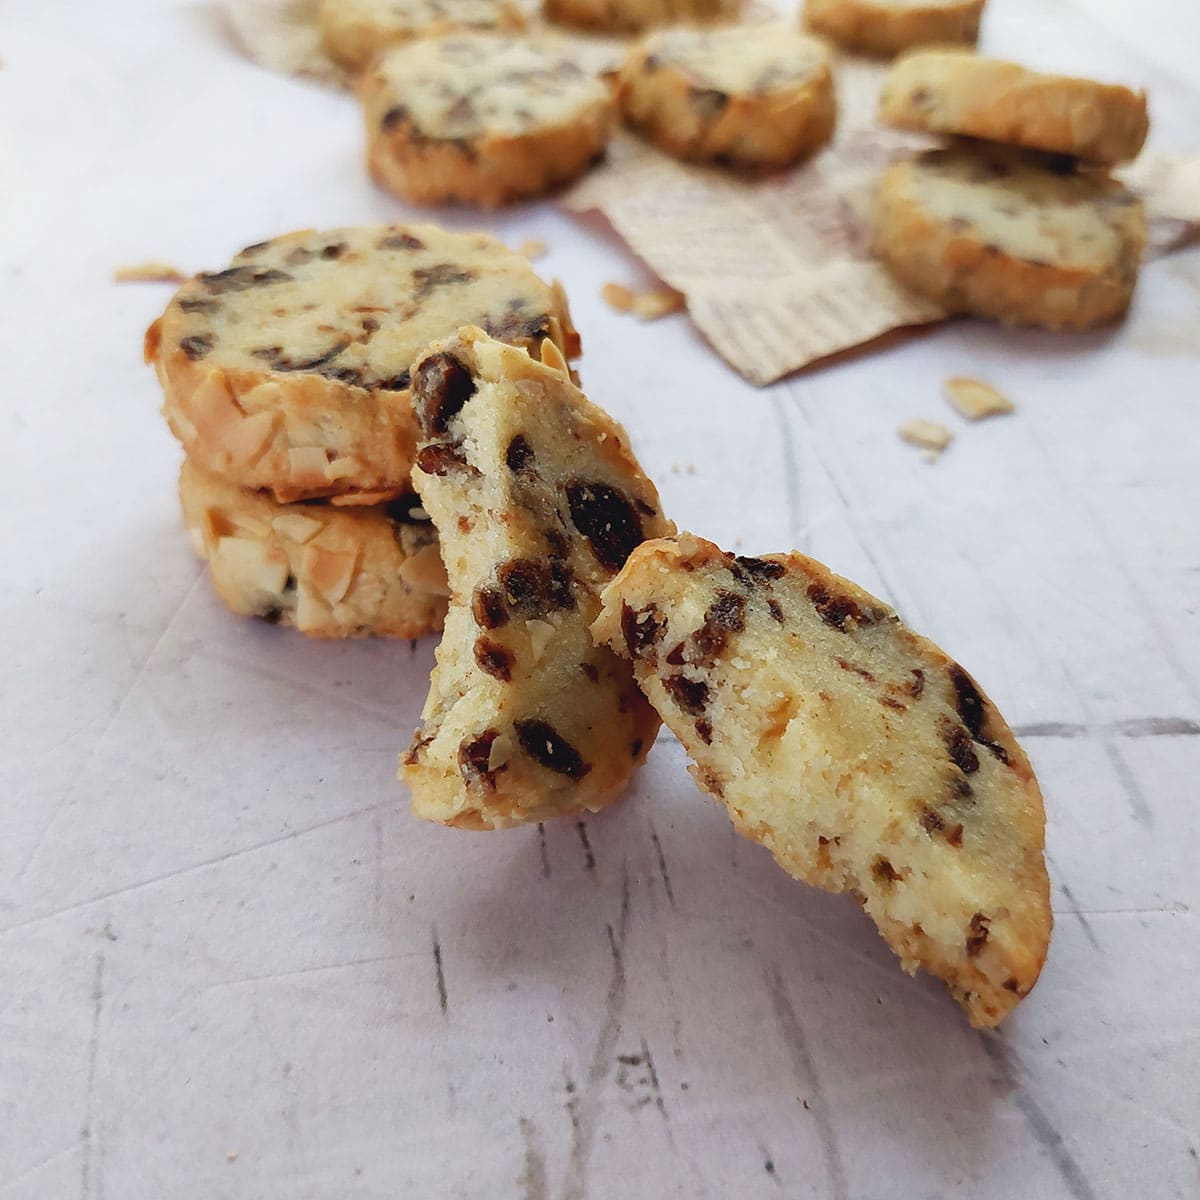 Studded with sweet dates and a crunchy edge of almonds, enjoy these delicious cookies anytime for a snack or dessert.